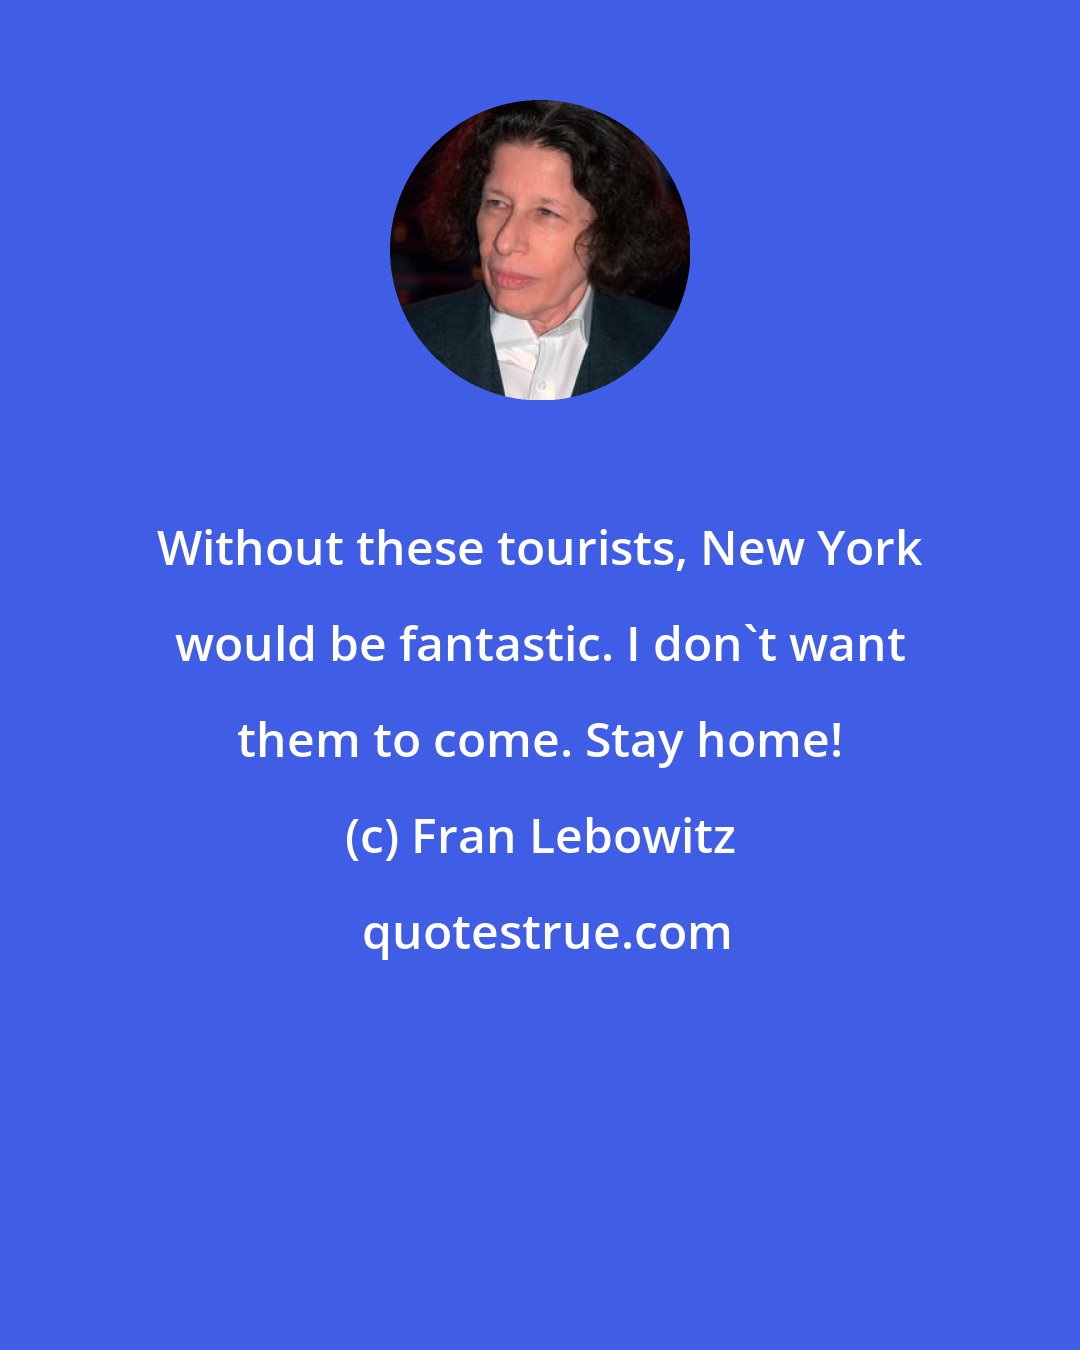 Fran Lebowitz: Without these tourists, New York would be fantastic. I don't want them to come. Stay home!